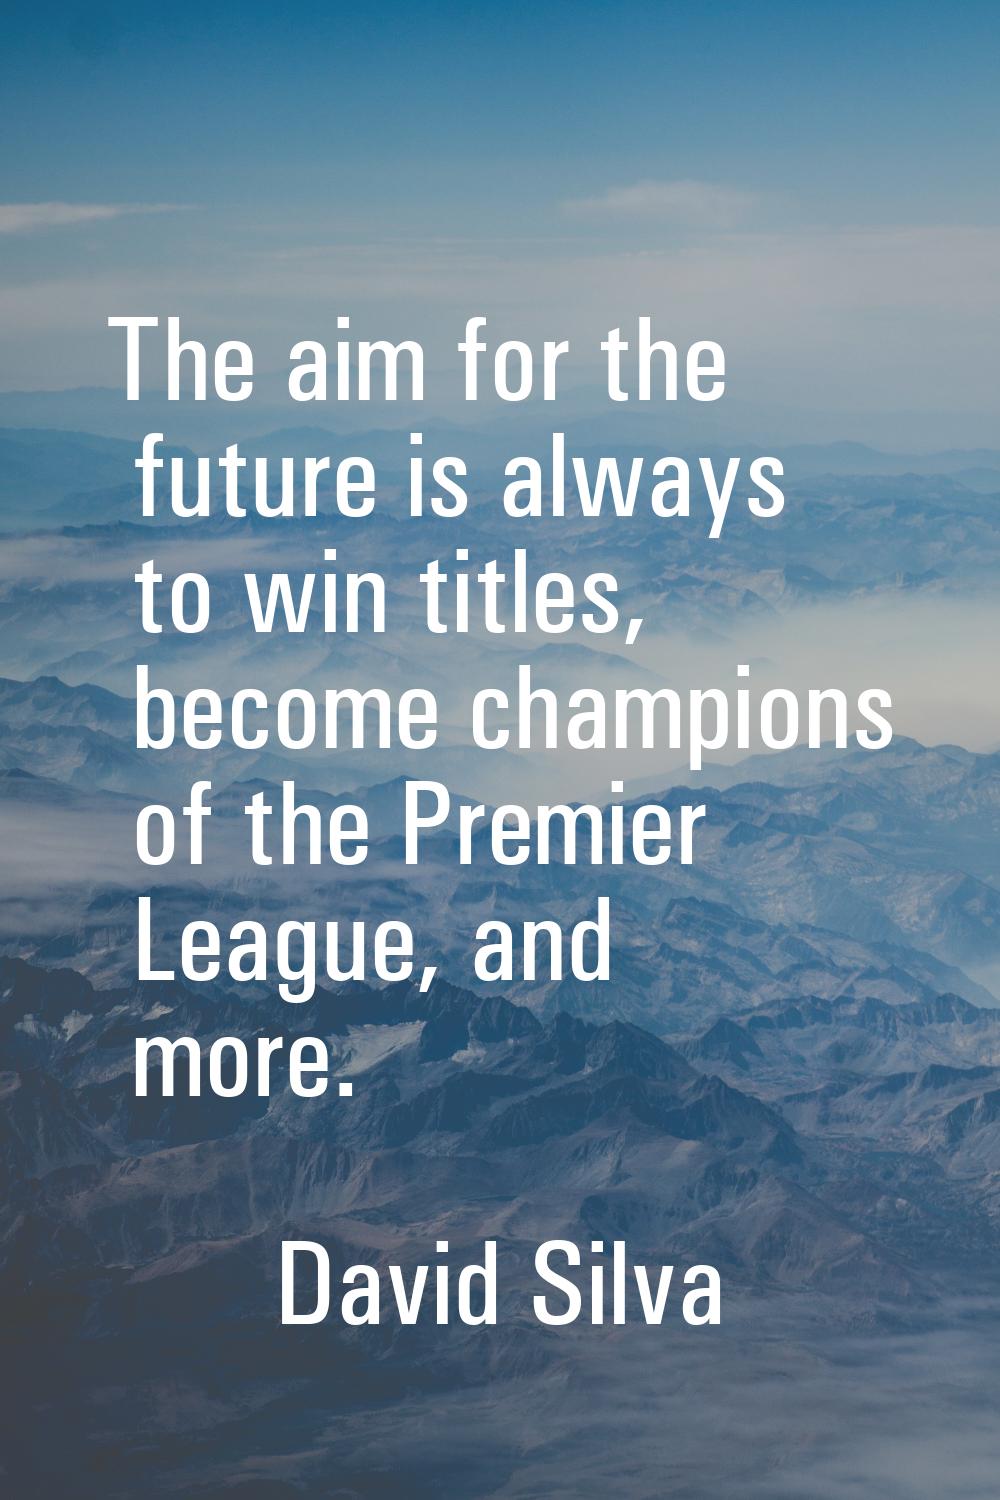 The aim for the future is always to win titles, become champions of the Premier League, and more.